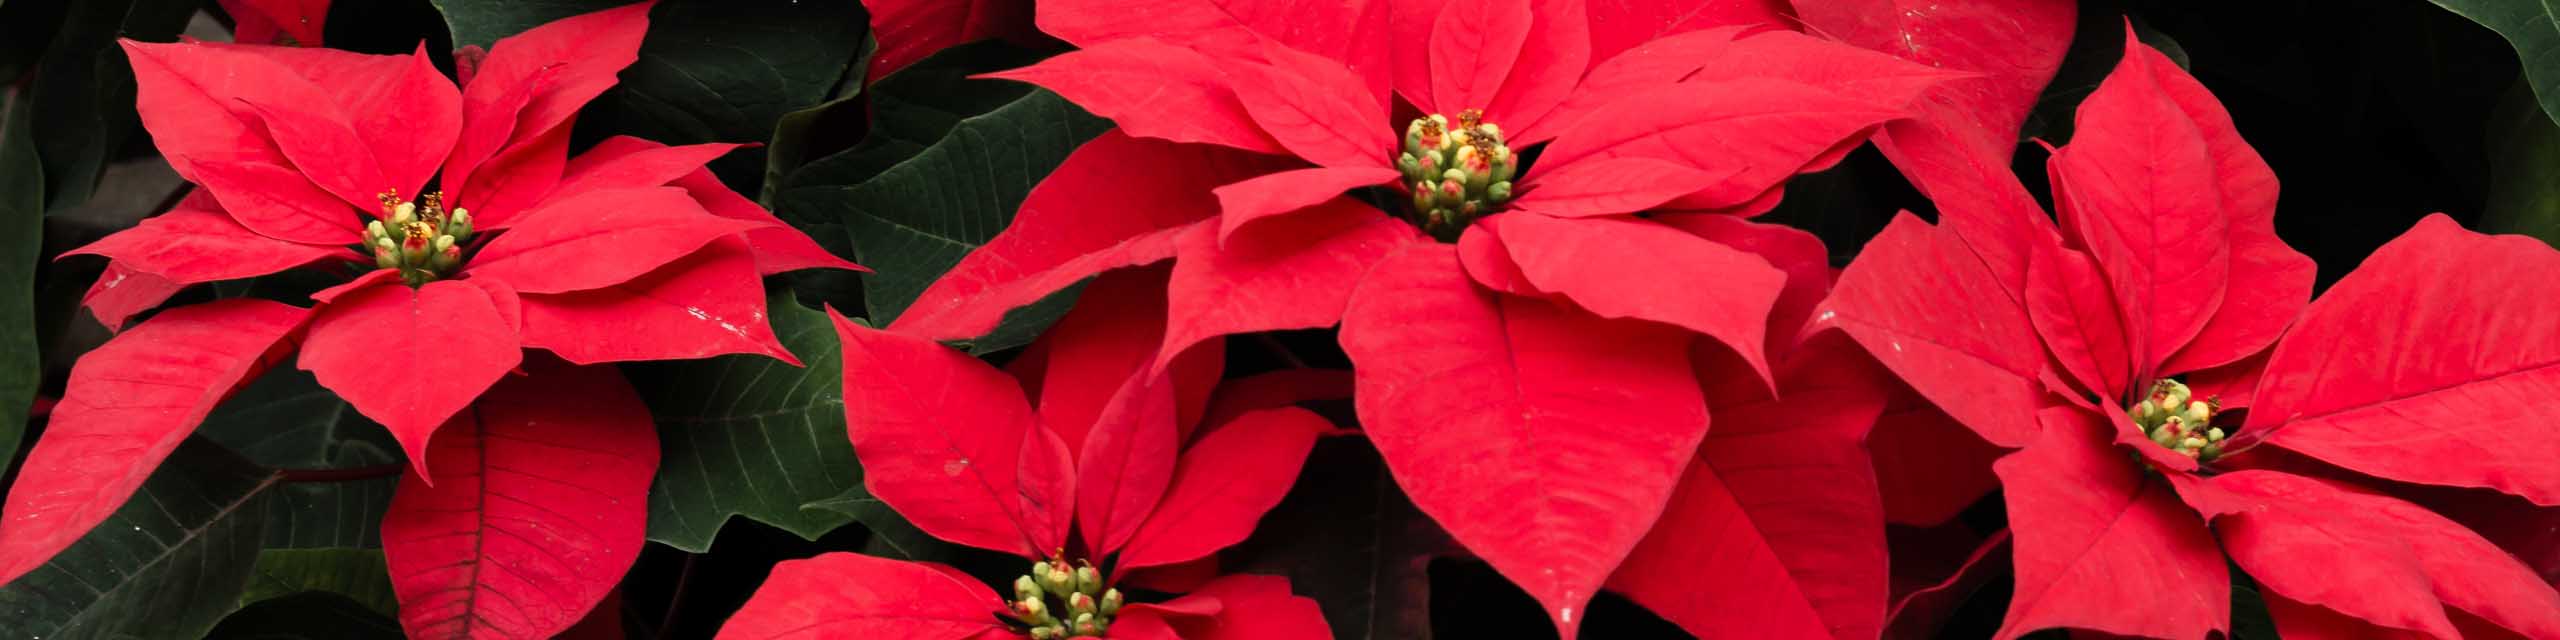 Close up of red poinsettia plants.